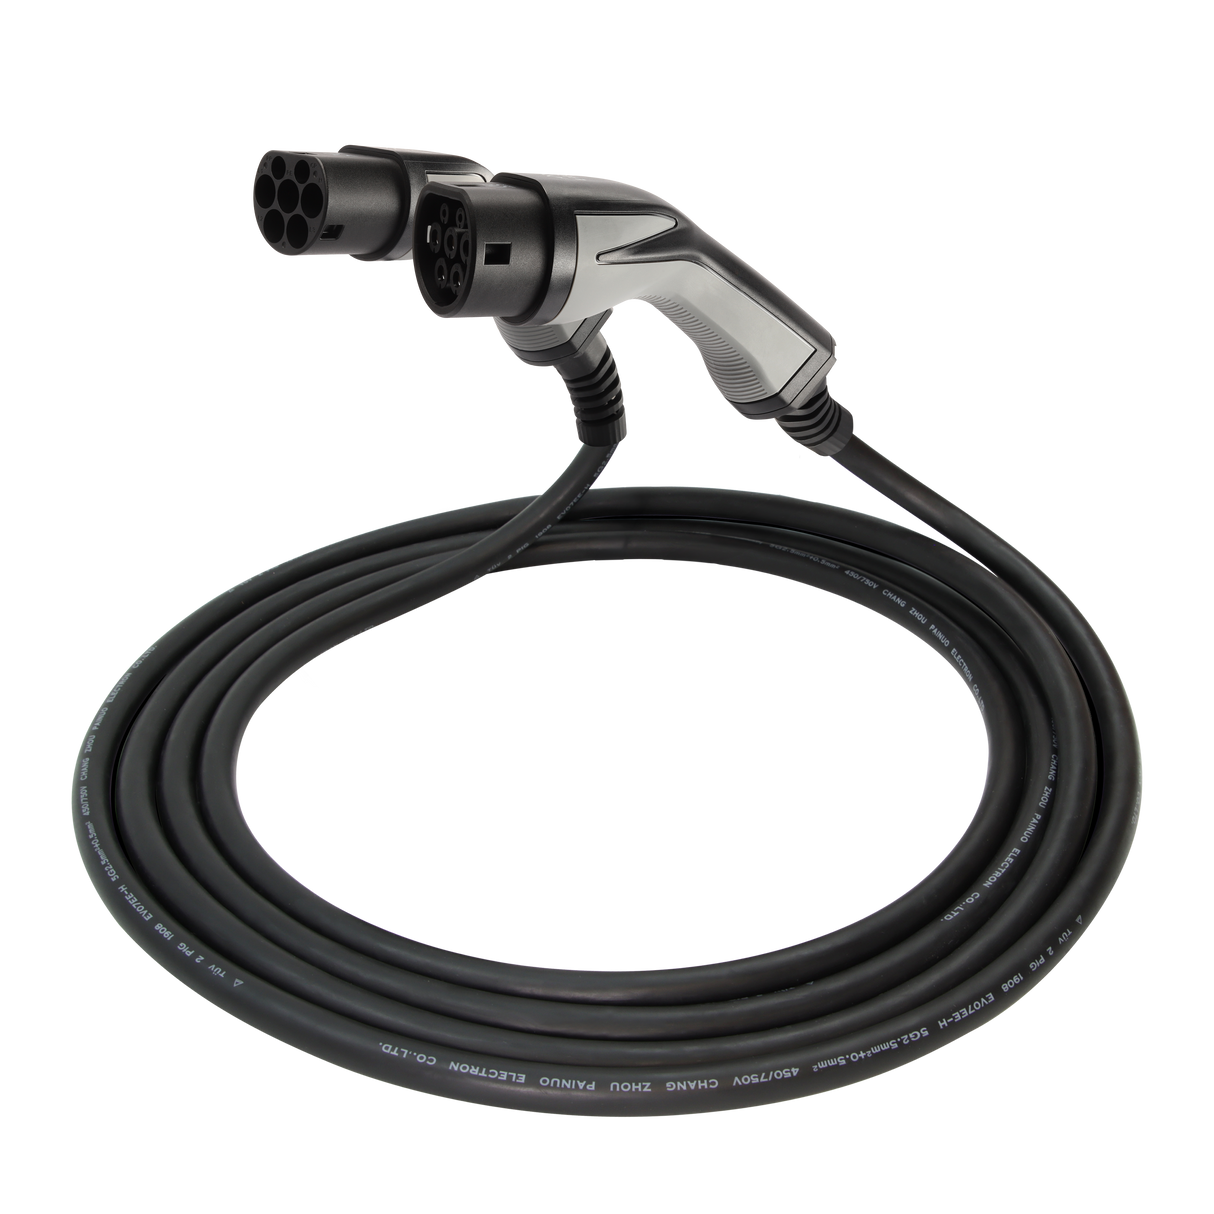 Charging cable Peugeot E -Rifter - Erock Pro Type 2 - 16A 3 phase (11 kW)